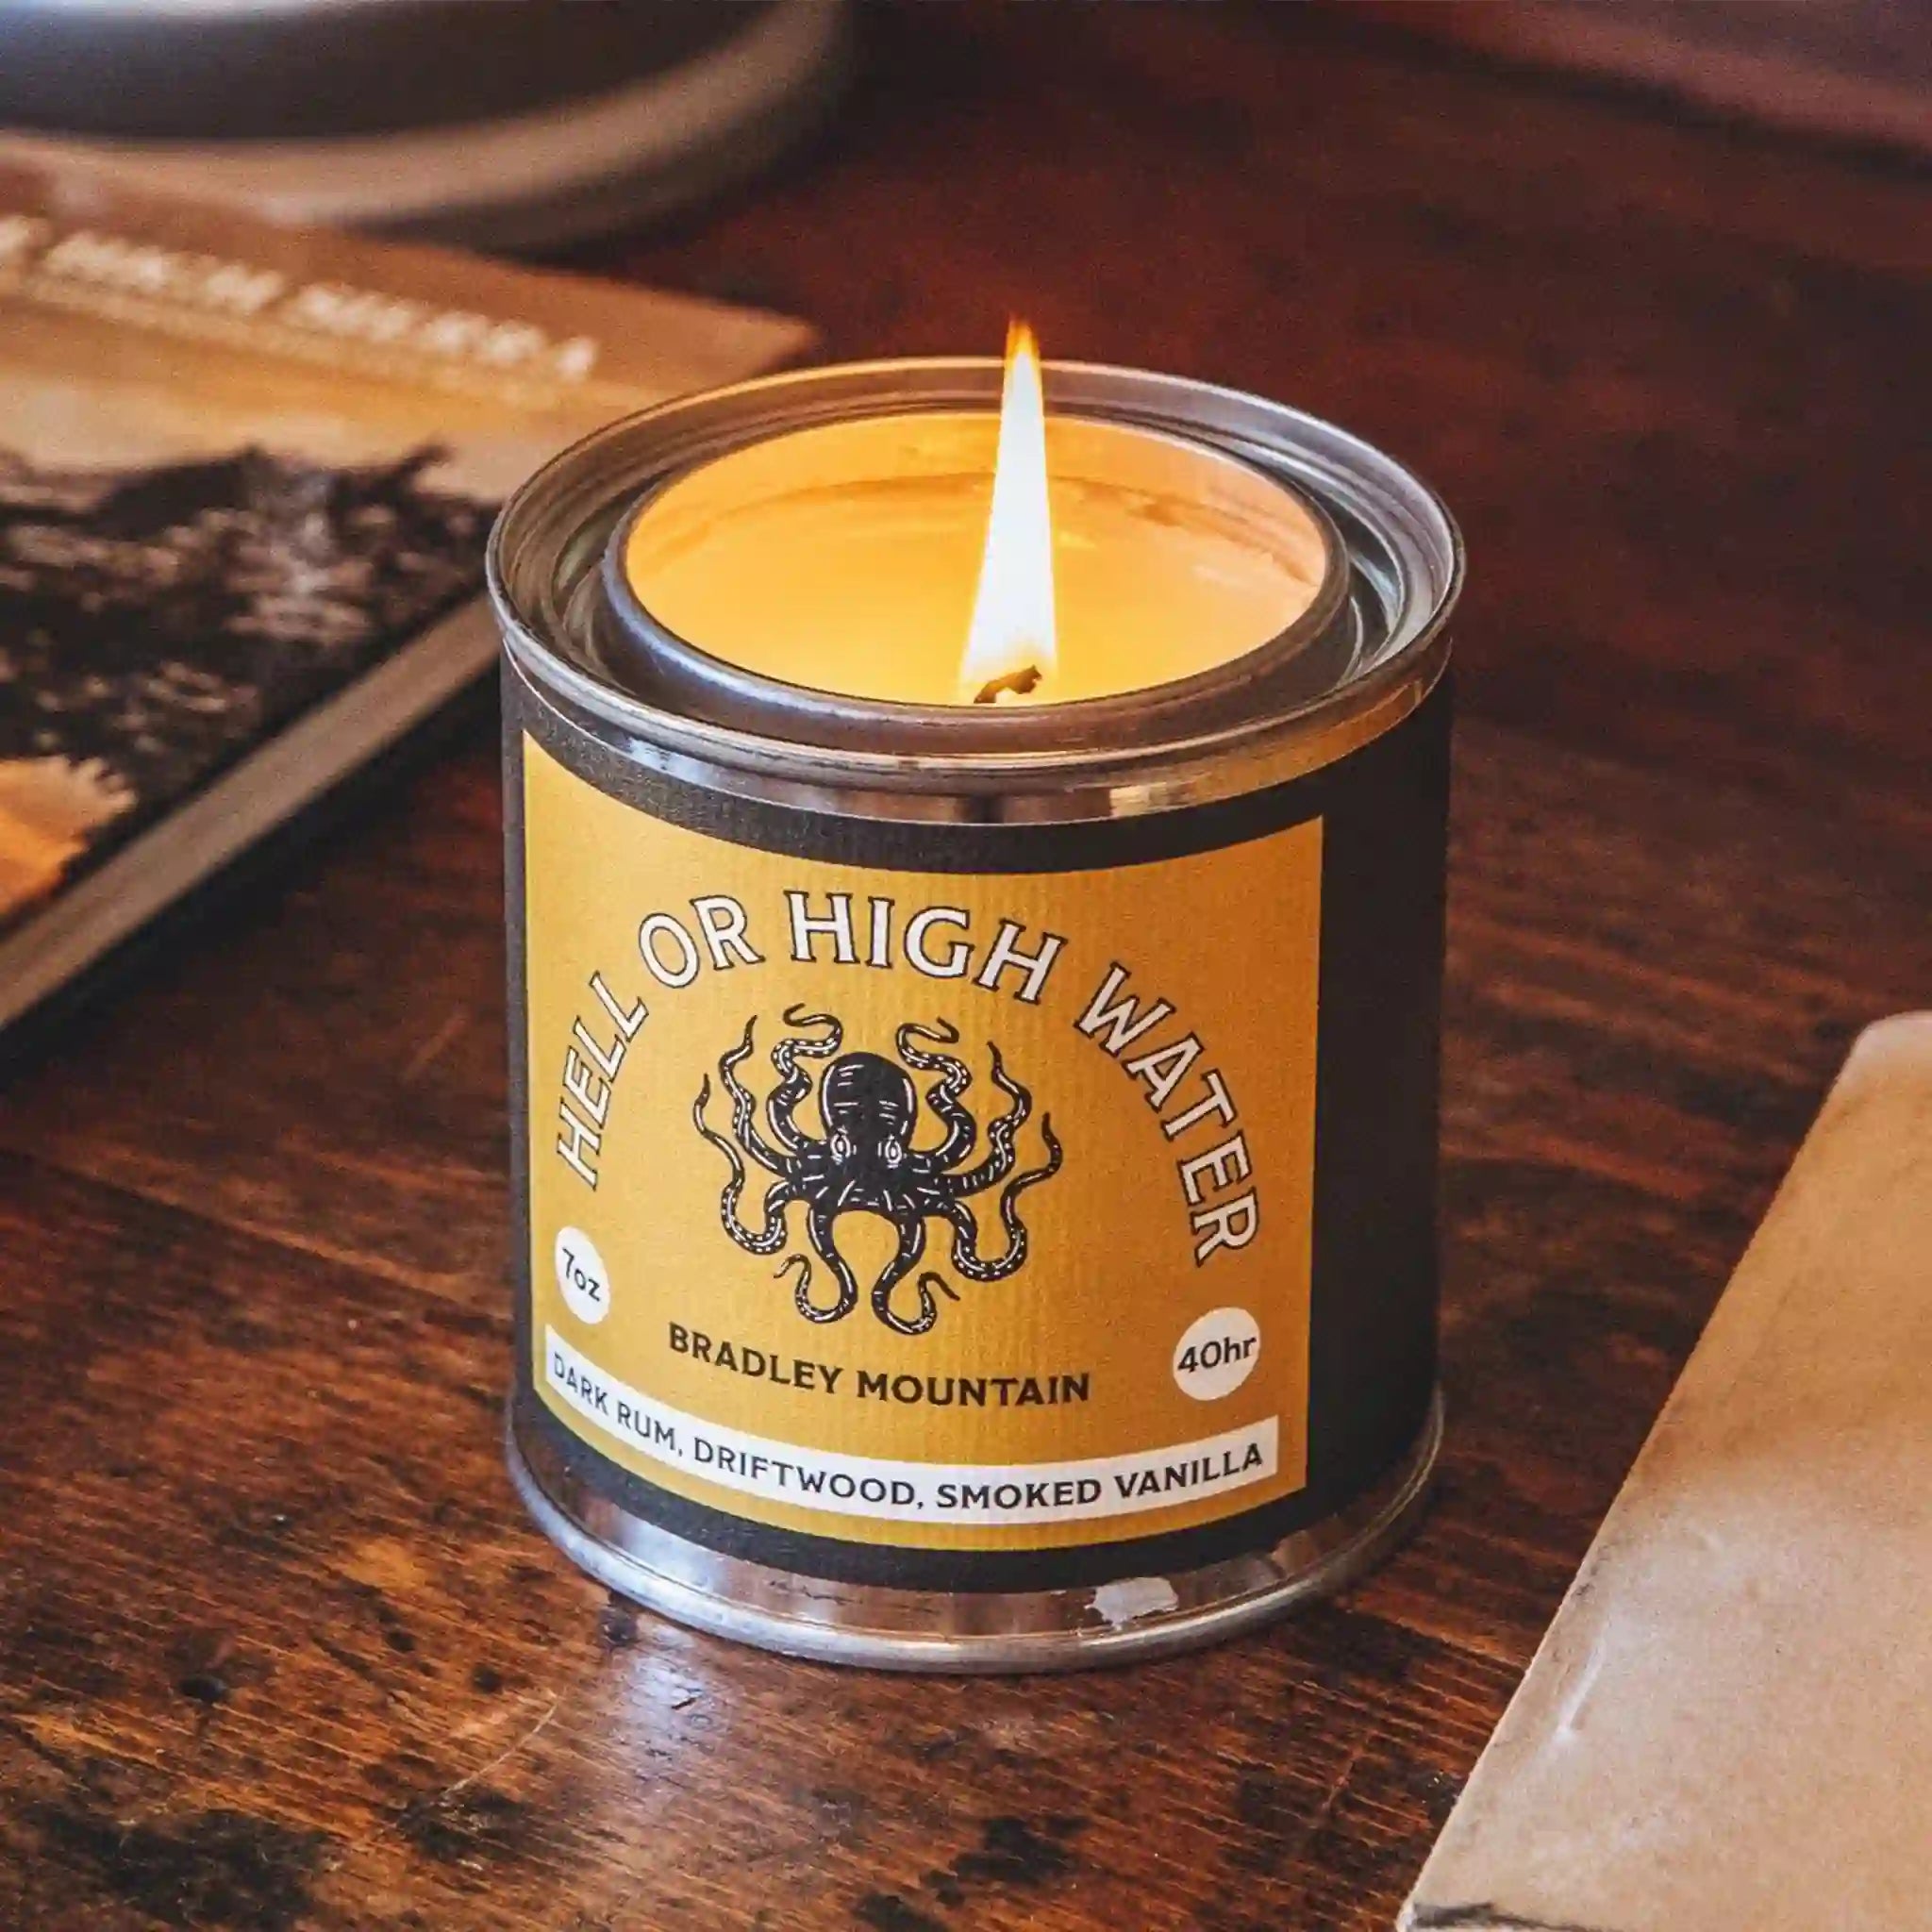 On a wood background is a tin candle with a yellow label featuring a octopus graphic and text arched above it that reads, "Hell or High Water Bradley Mountain". 